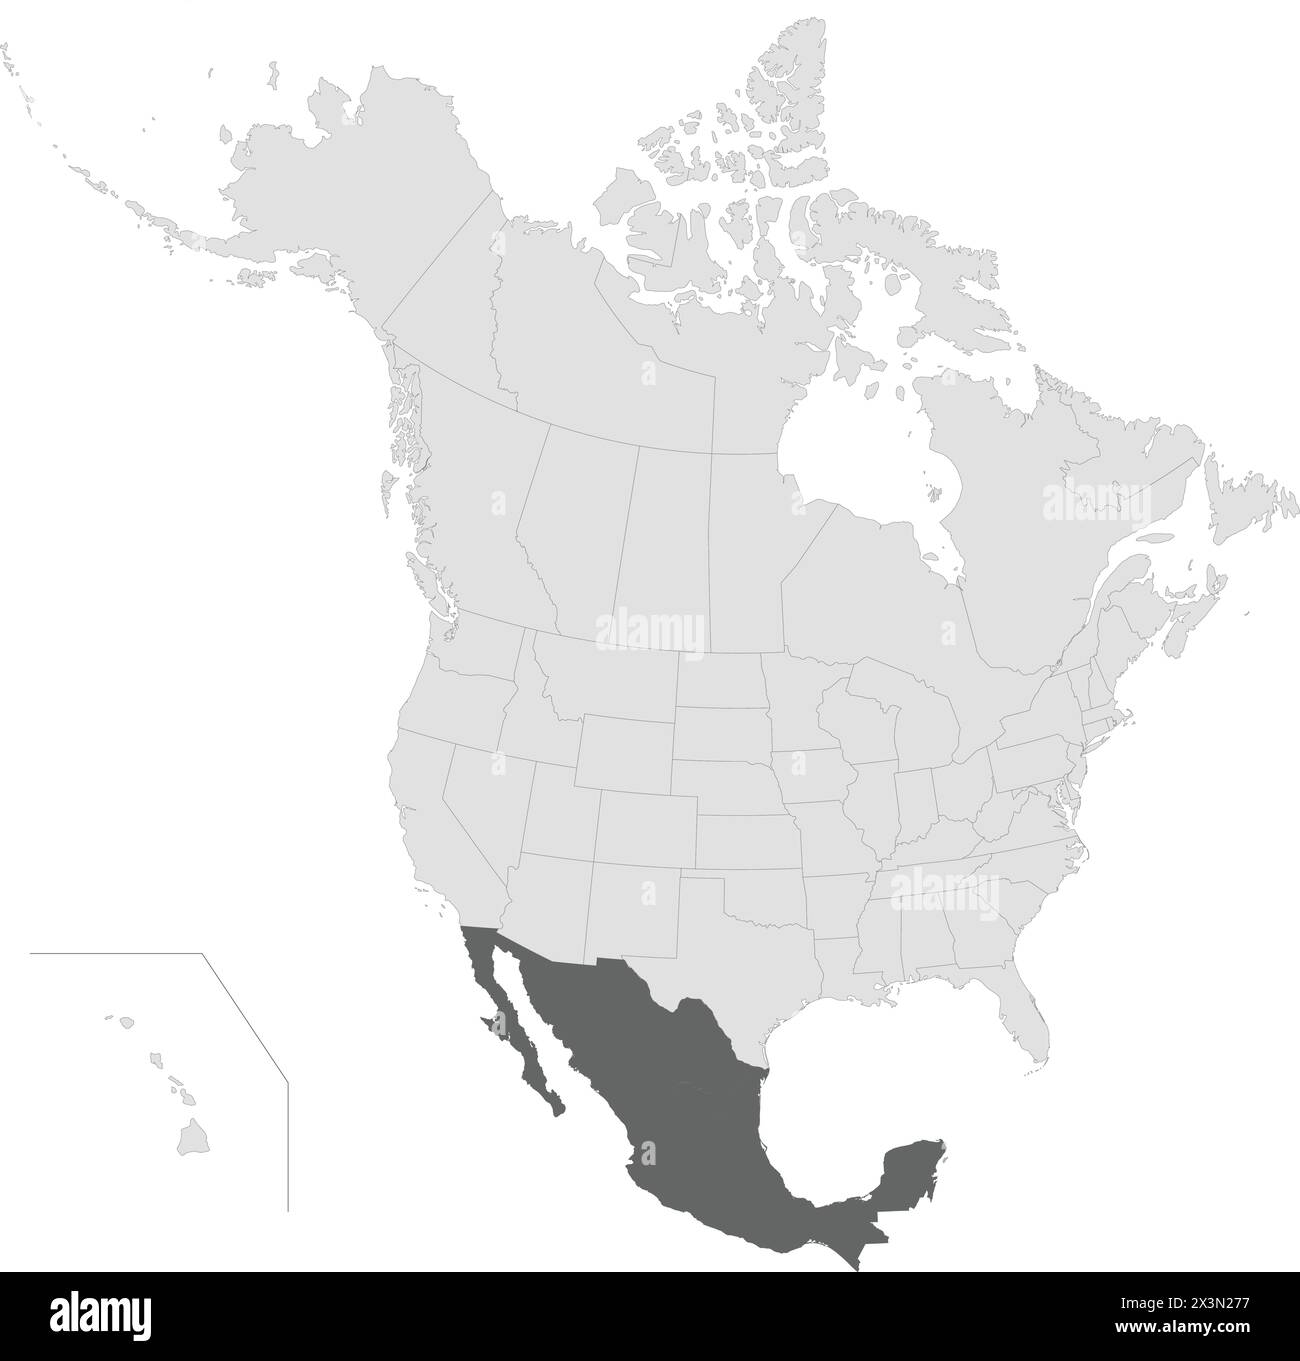 Dark grey map of MEXICO inside light grey map of the North American continent Stock Vector